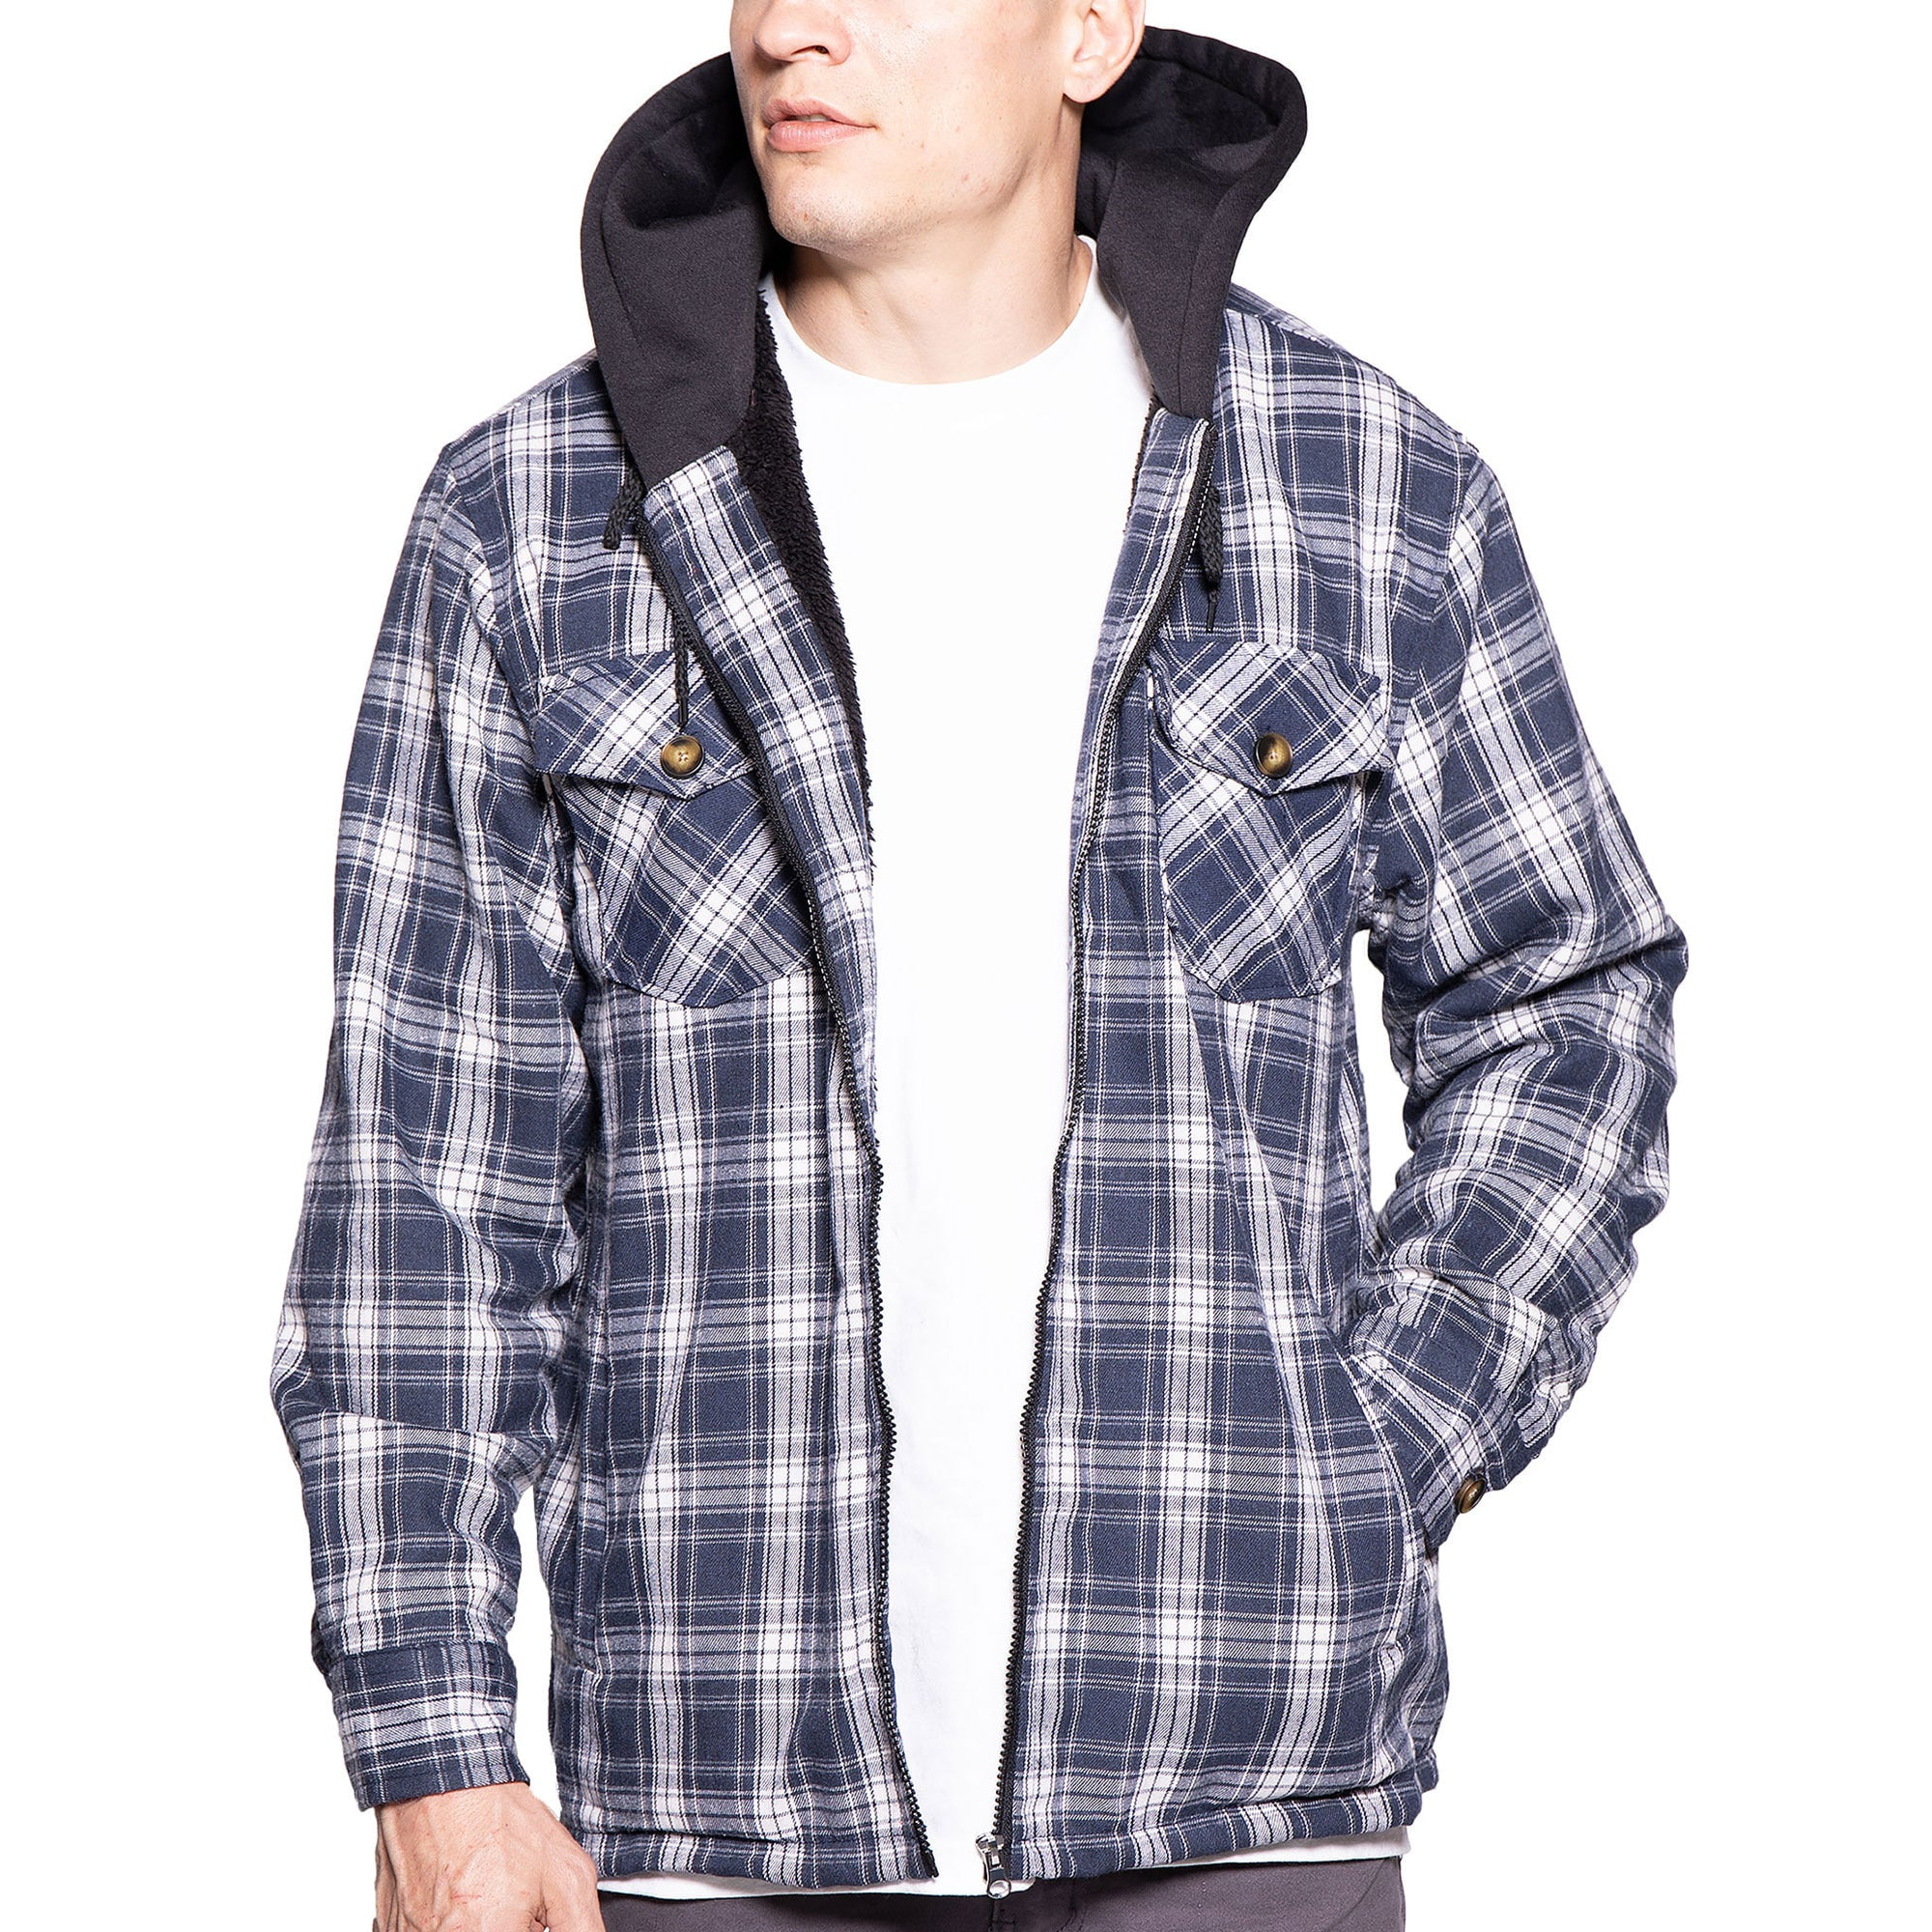 Visive Men's Sherpa-Lined Flannel Hoodie Jacket - Warm Zip-Up Layer for ...